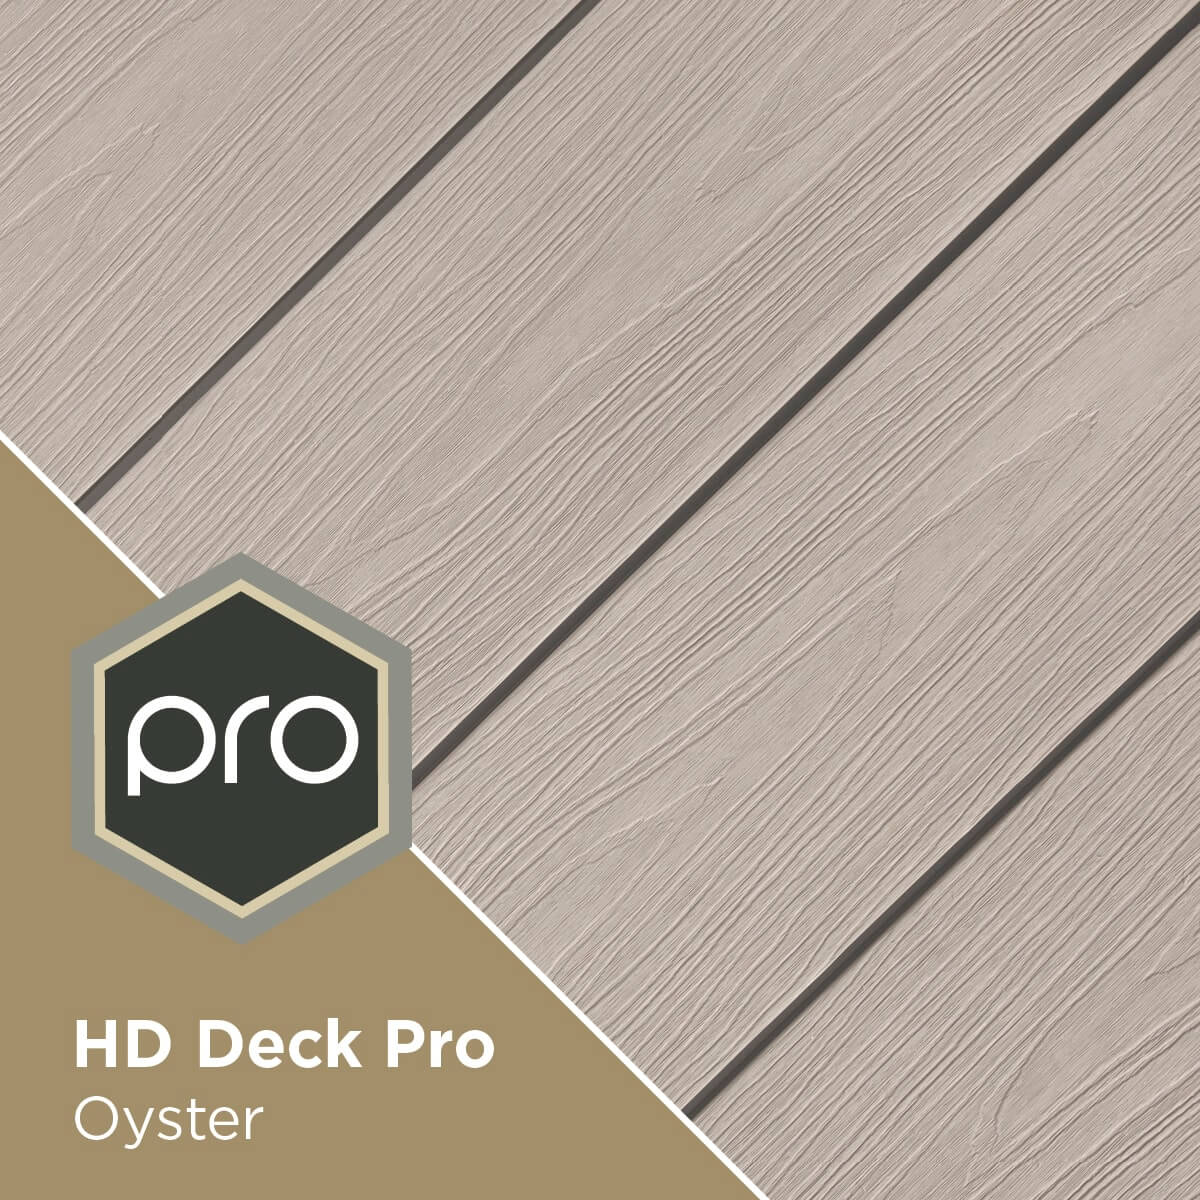 HD Deck Pro Oyster